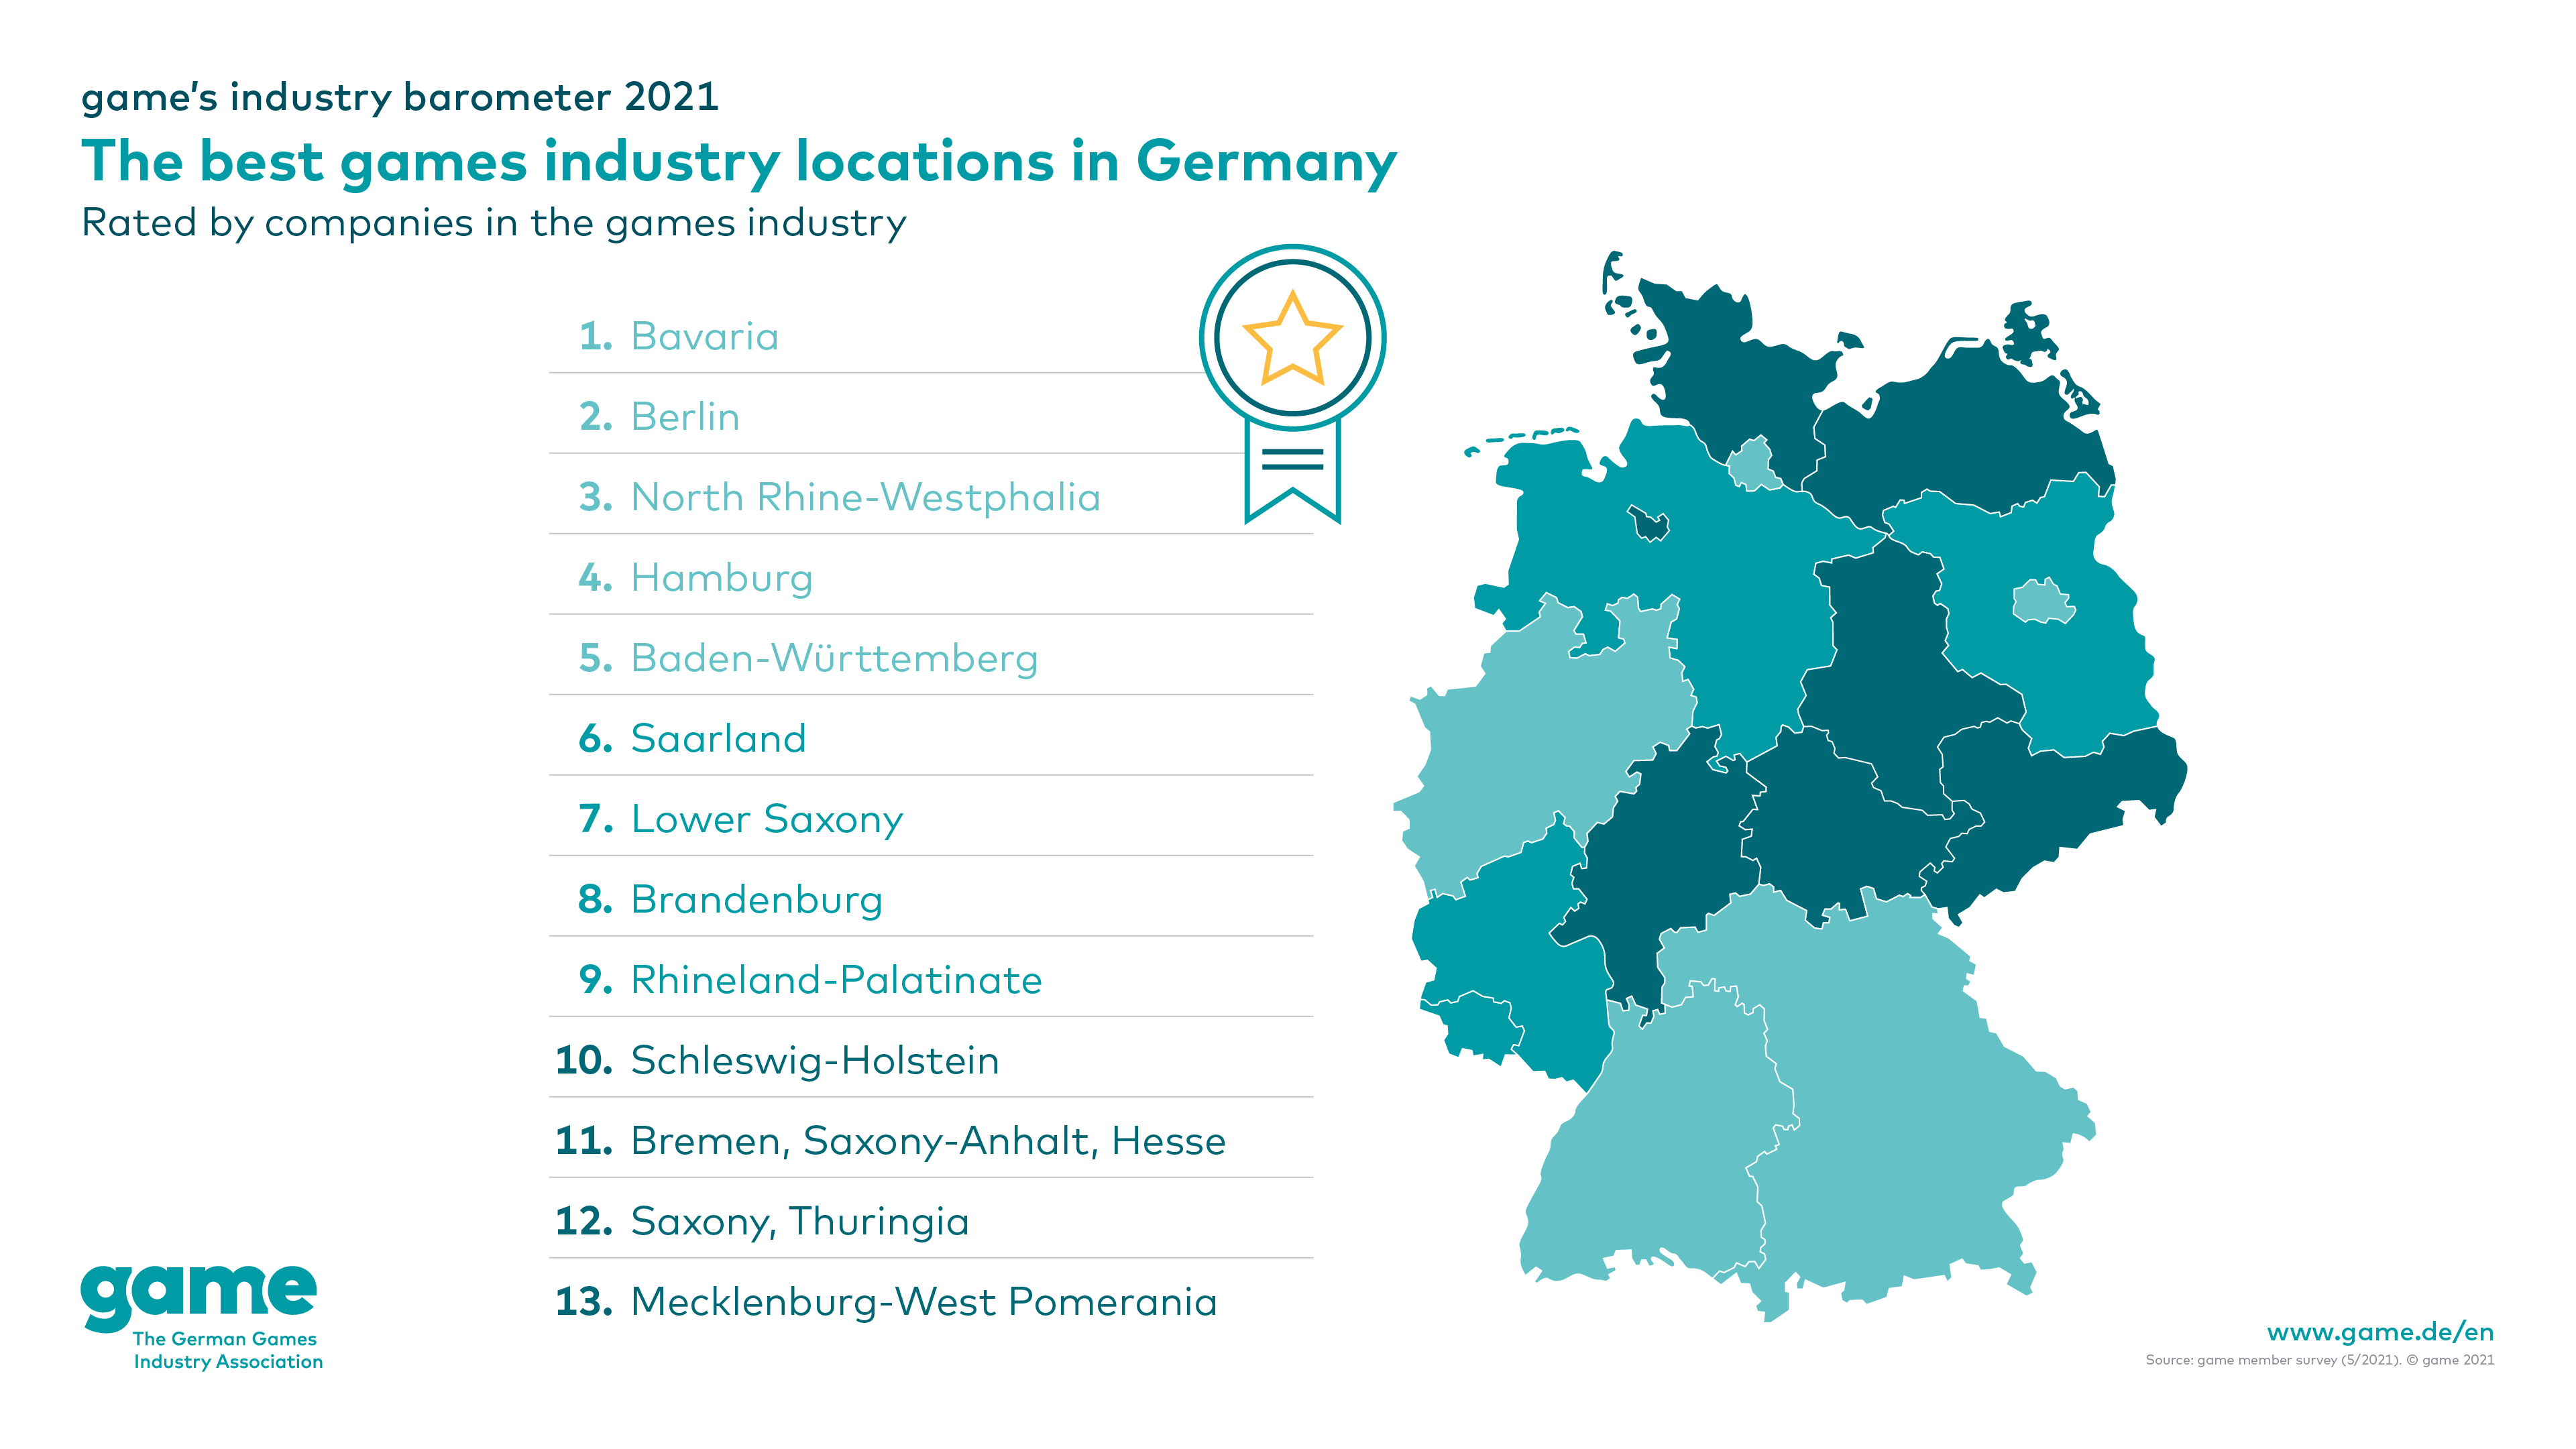 The best games industry locations in Germany